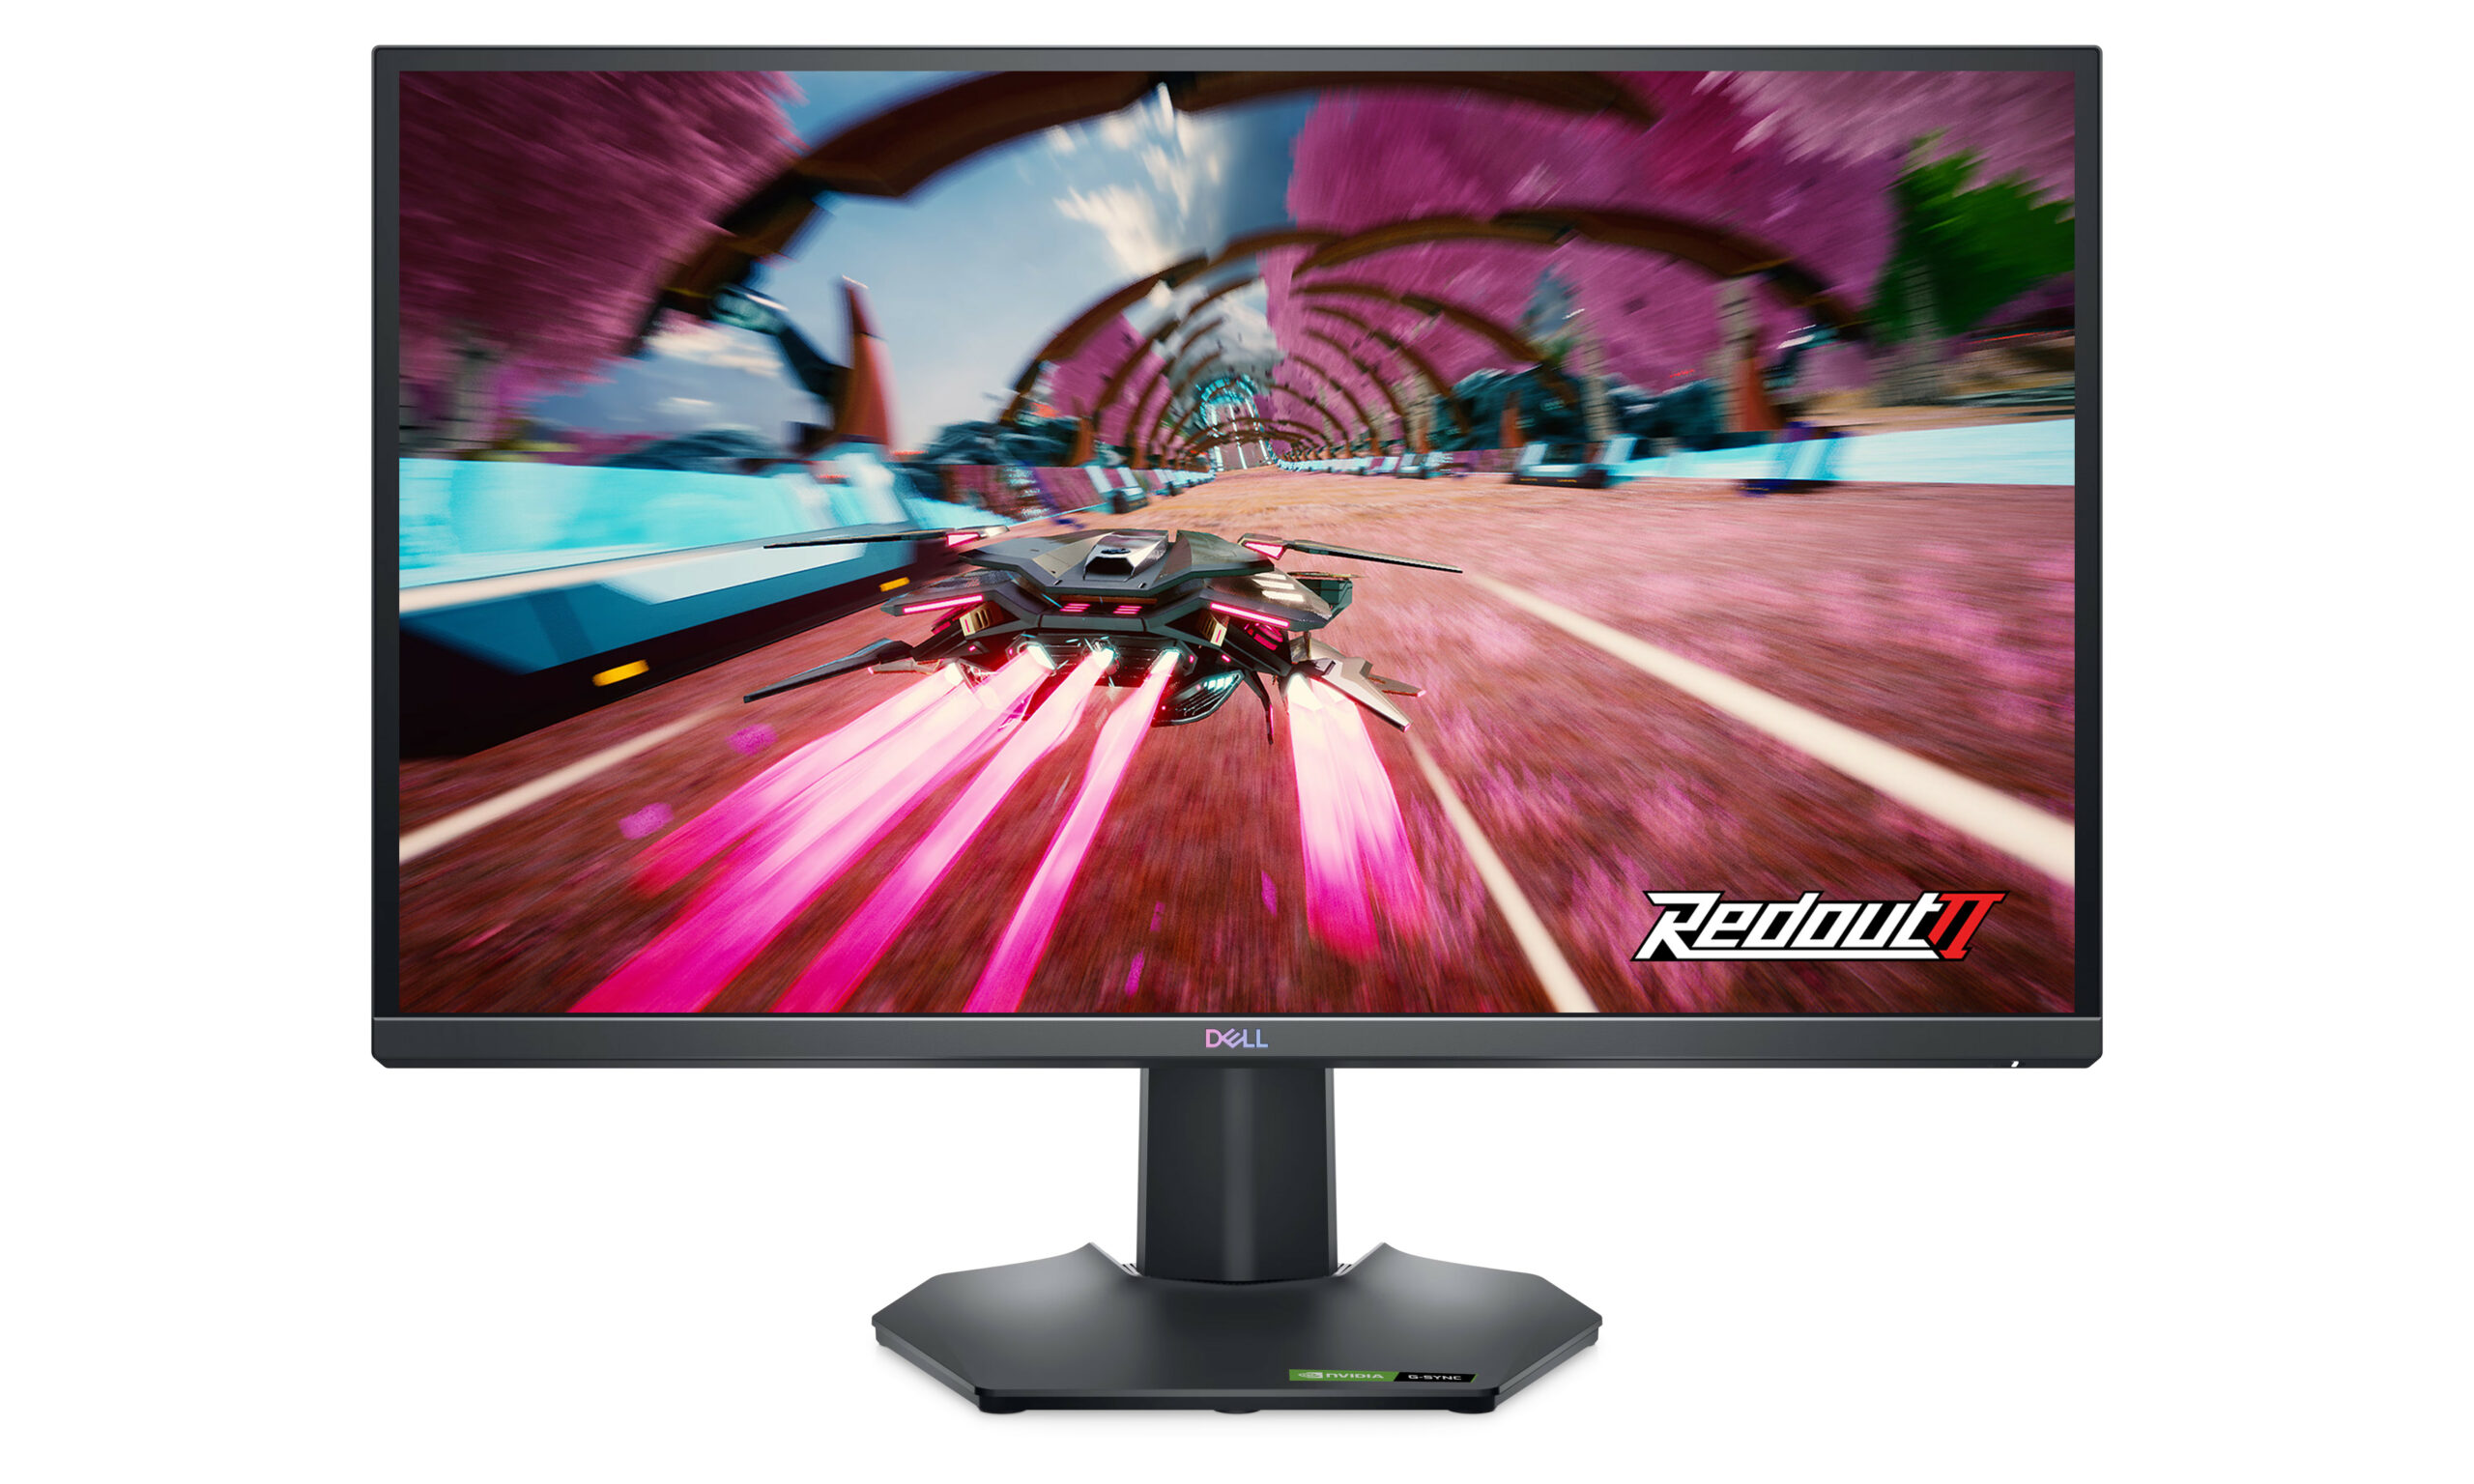 Get this 27-inch 1440p Dell gaming monitor for just $162 right now